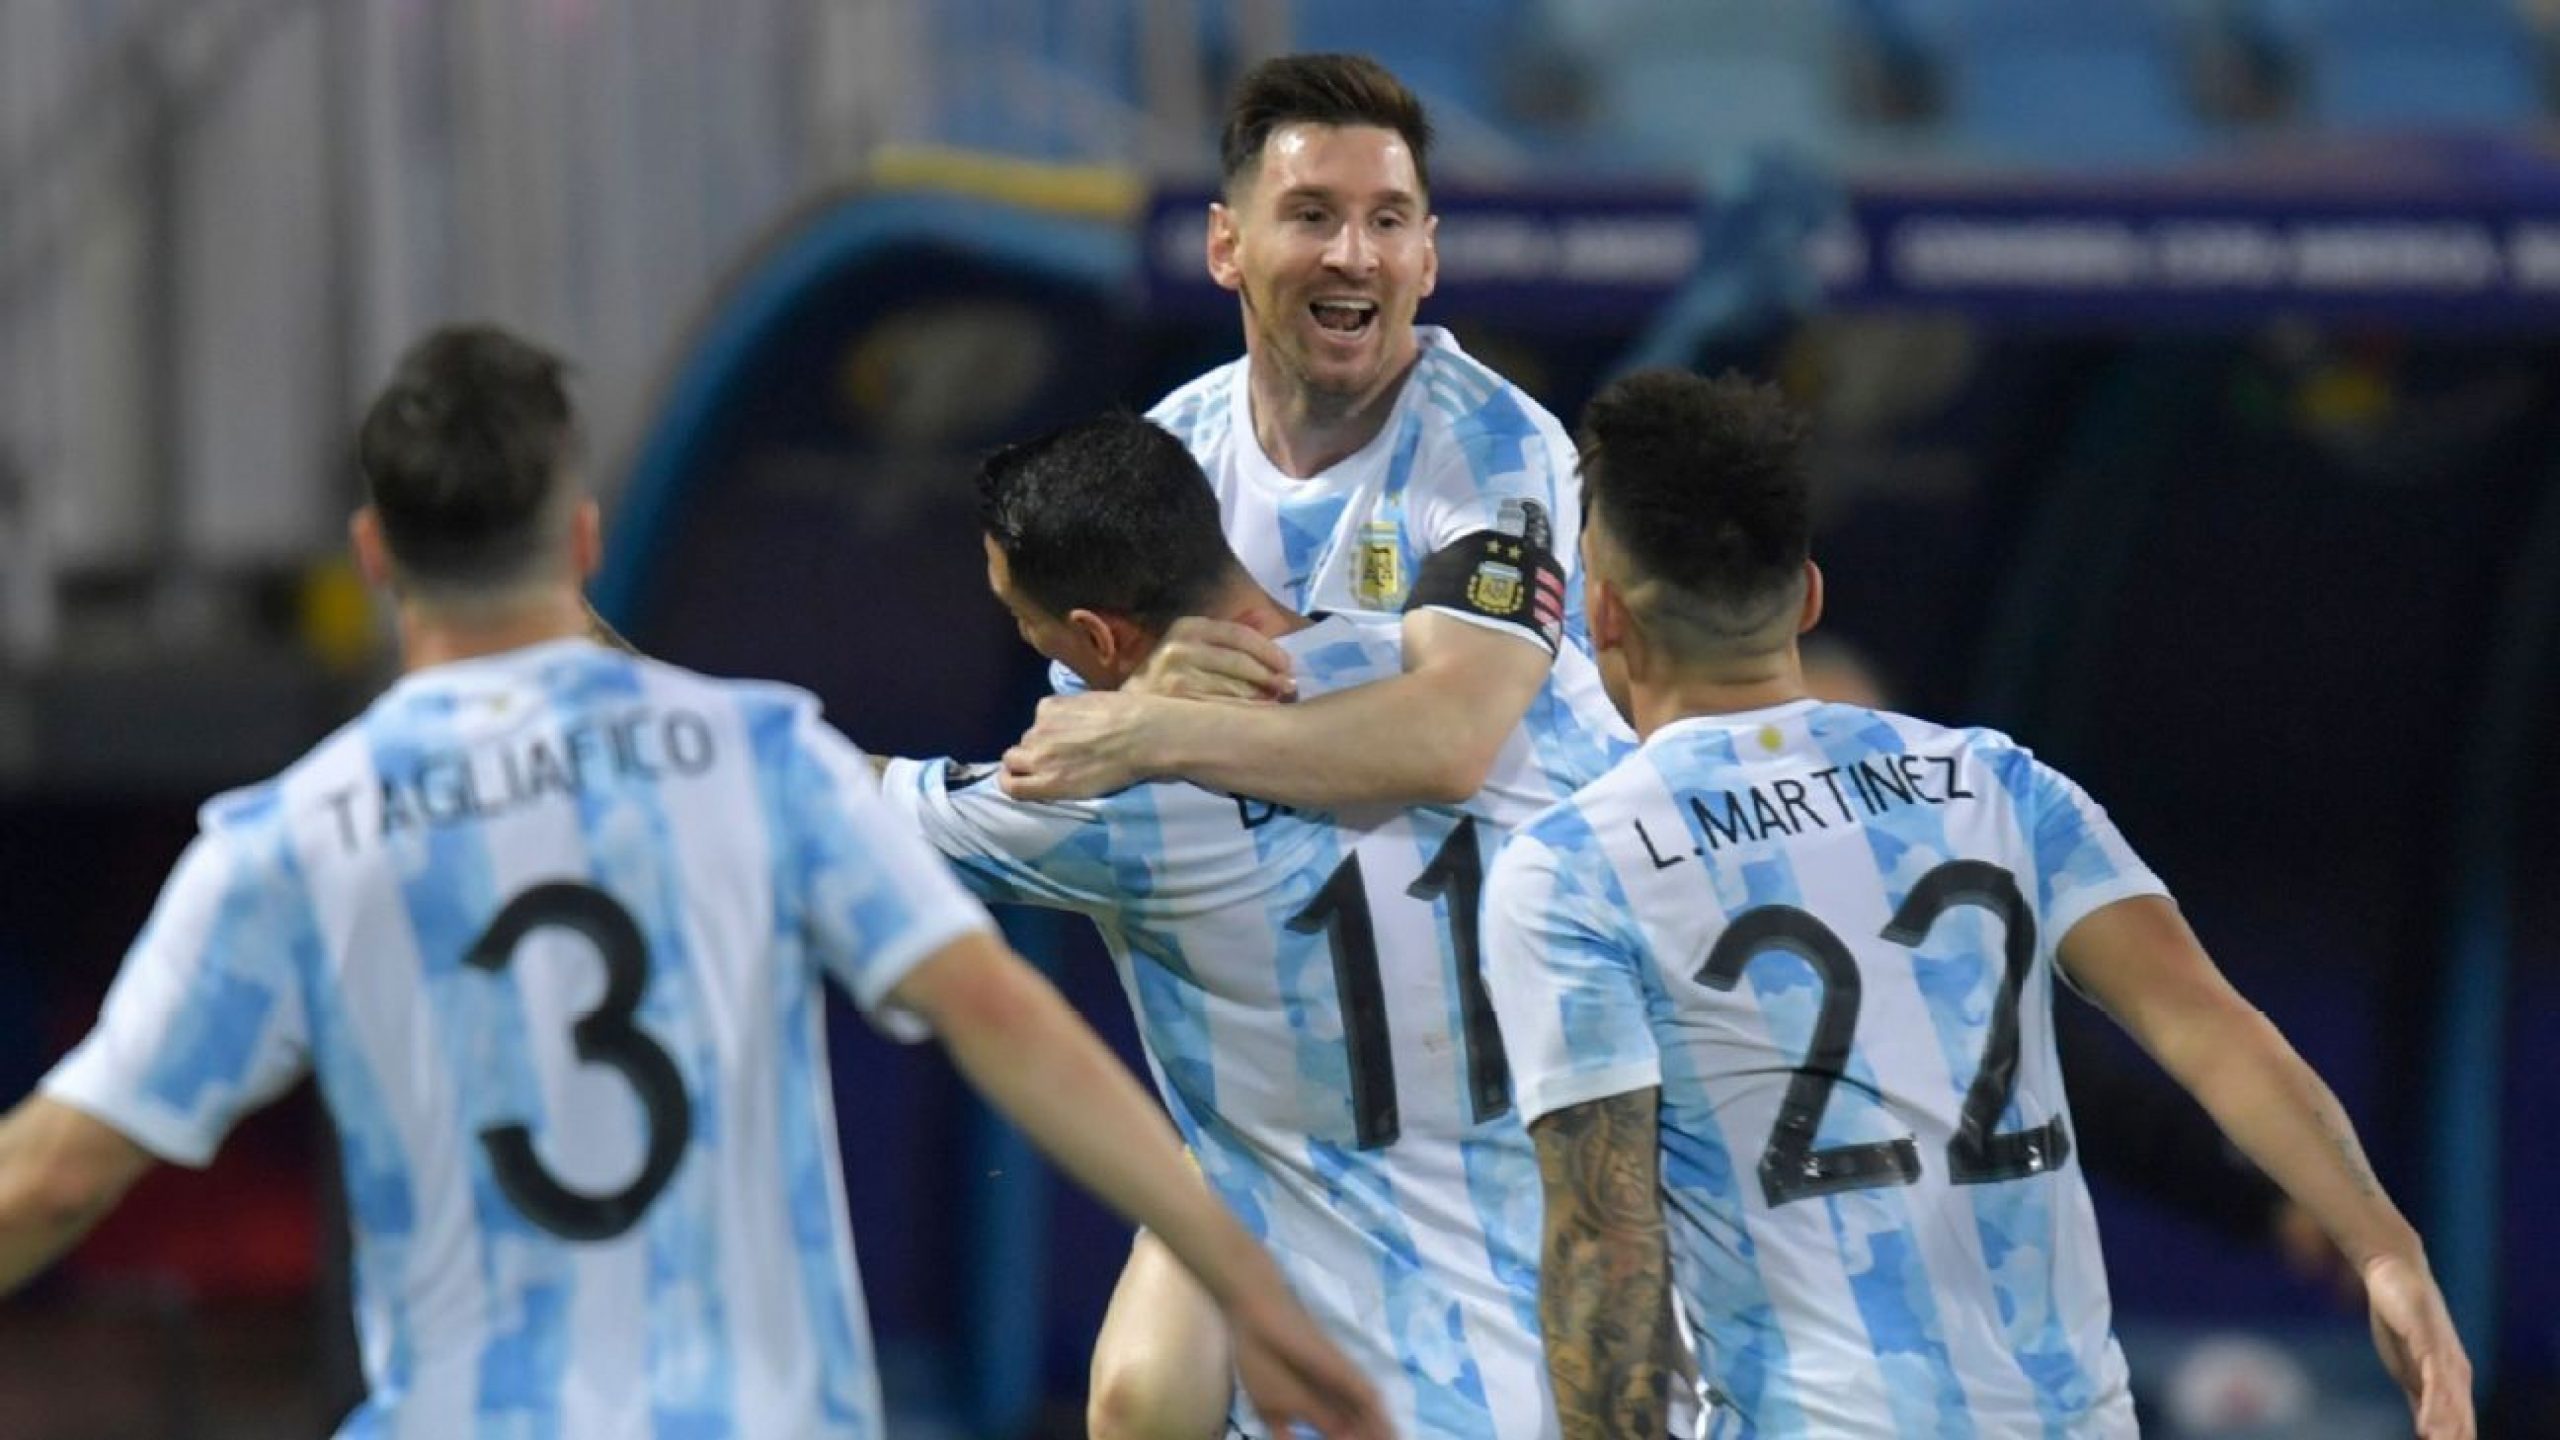 Argentina-Brazil final is possible, but more Messi magic may be needed